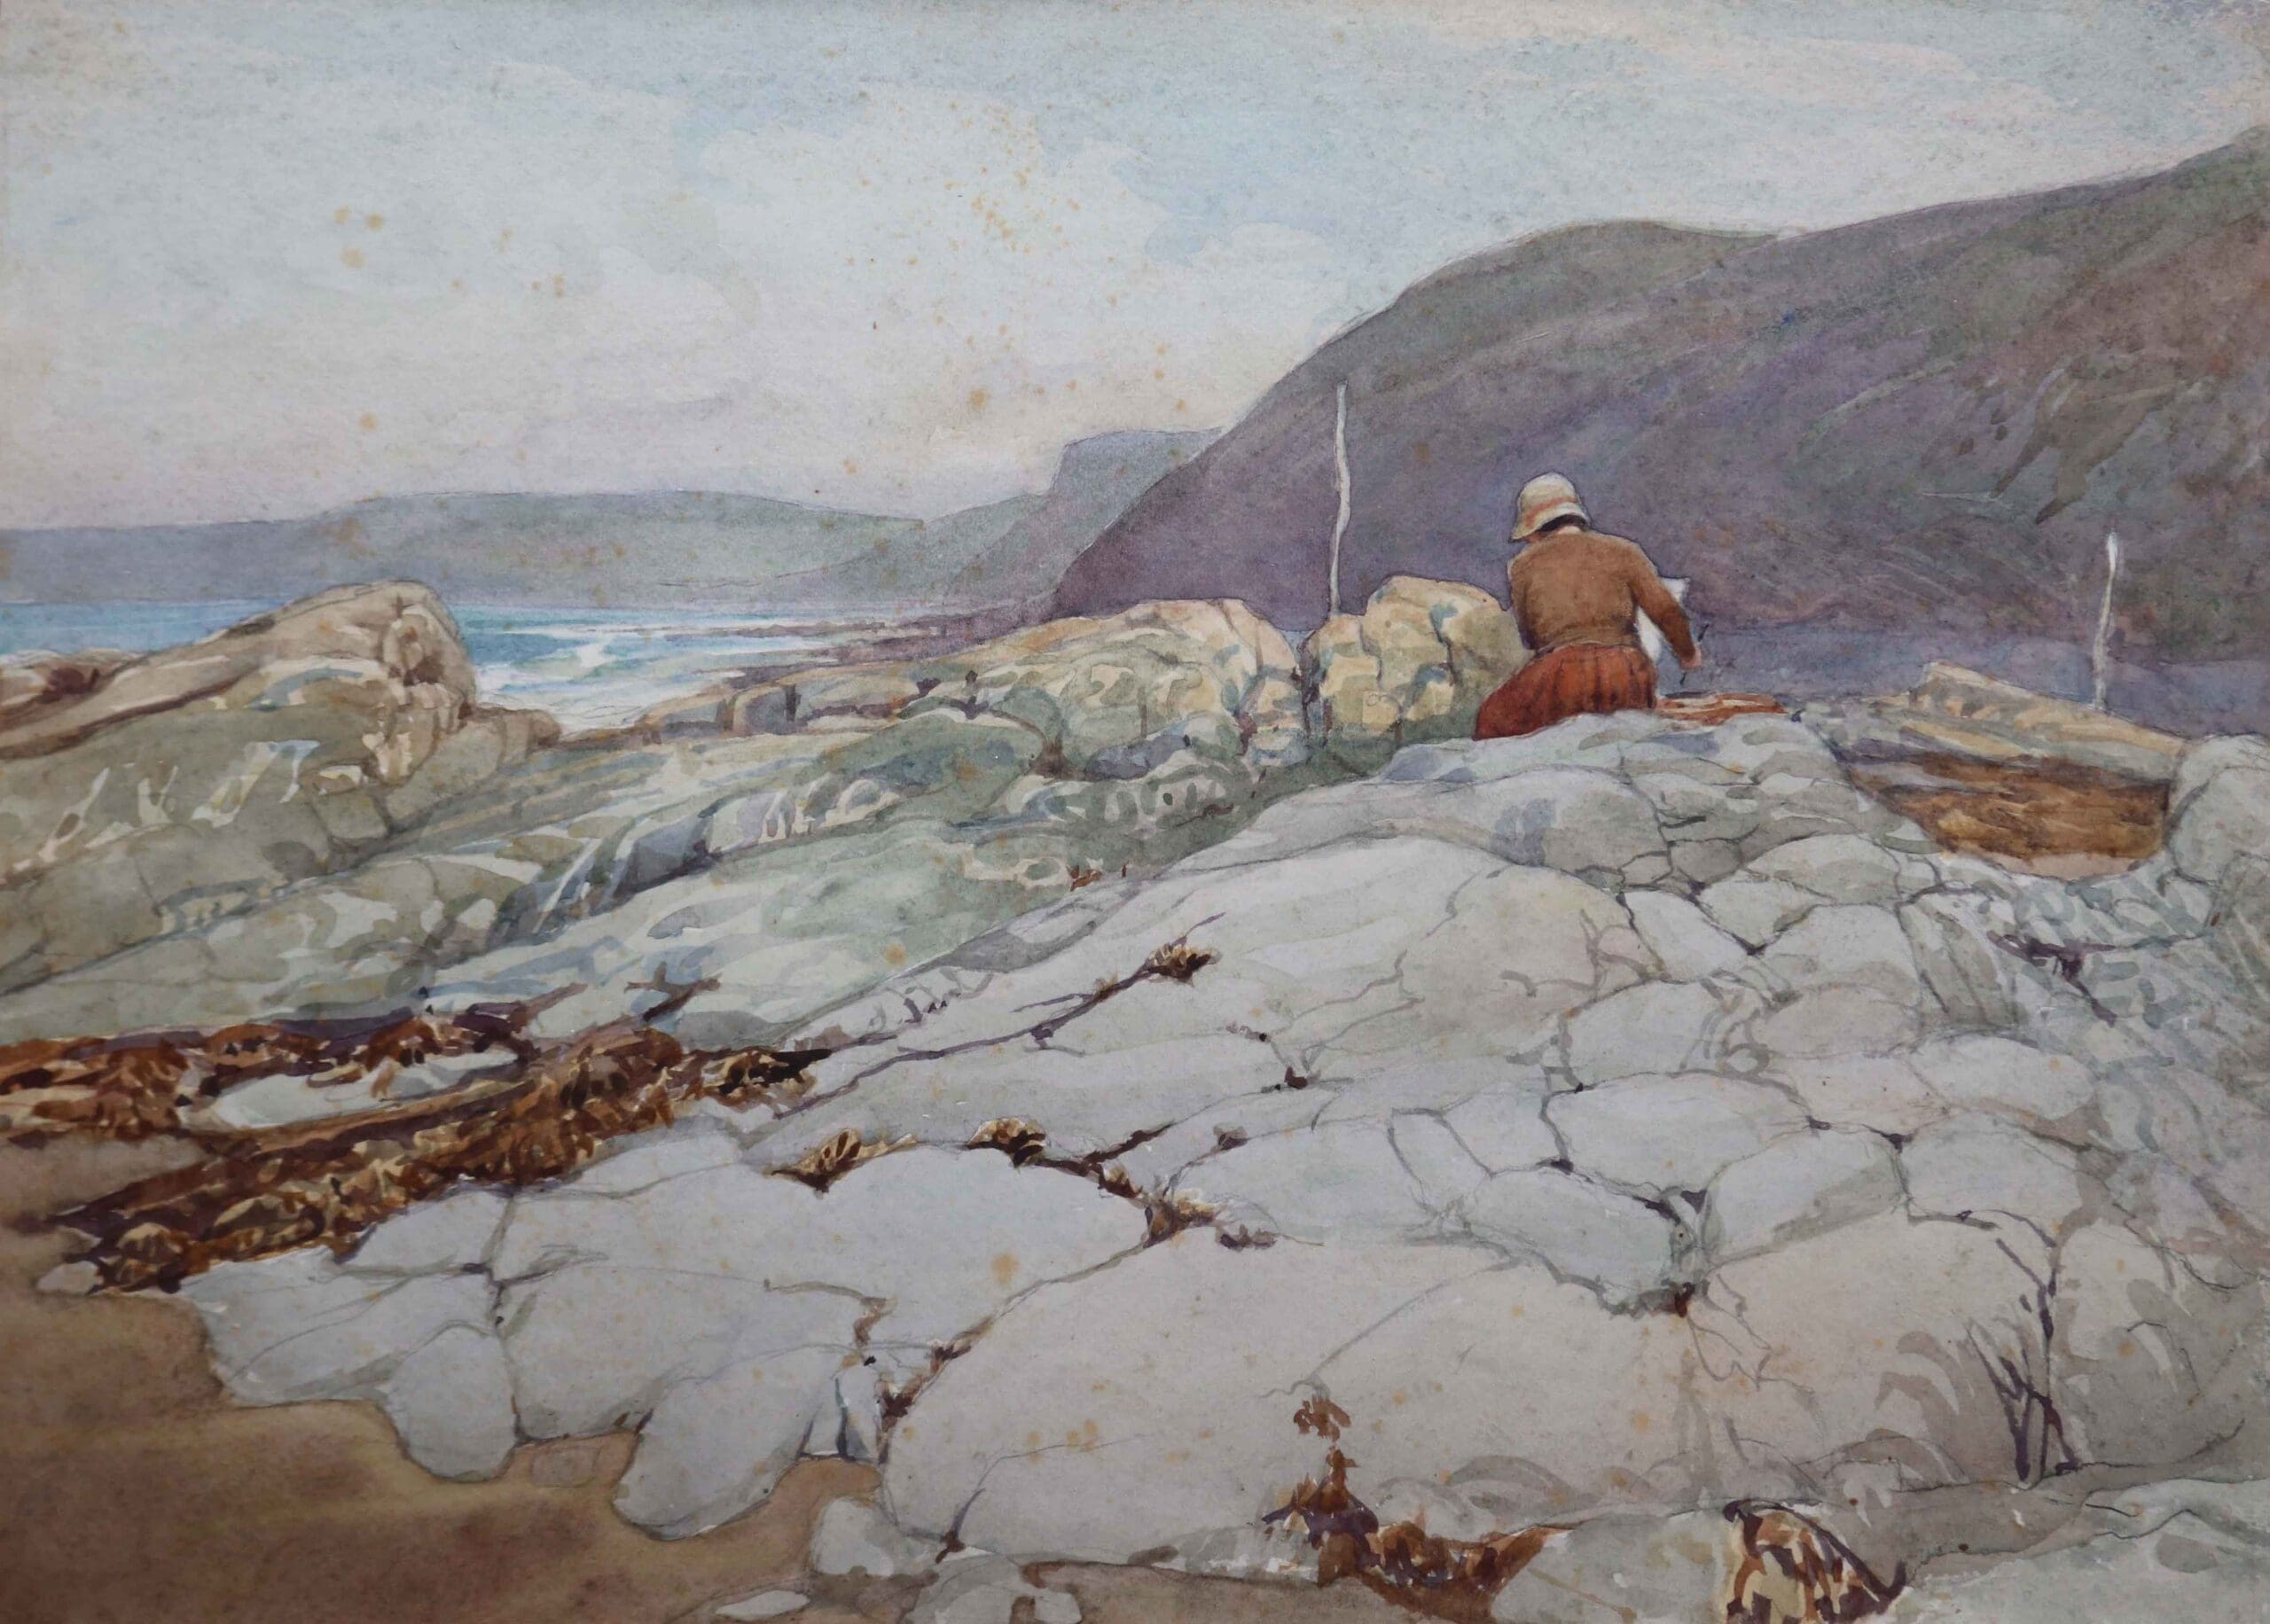 Judith Ackland's watercolour of a woman sat on the rocks at Bucks Mills